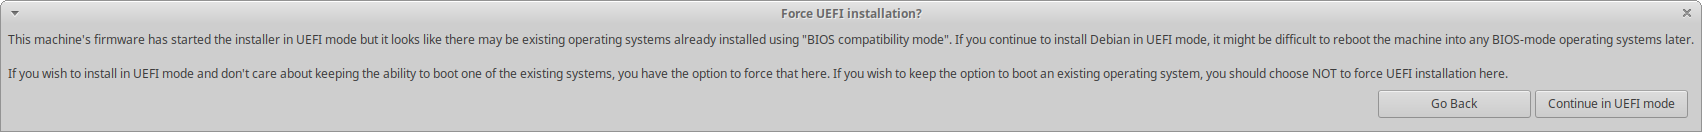 Force UEFI installation_001.png